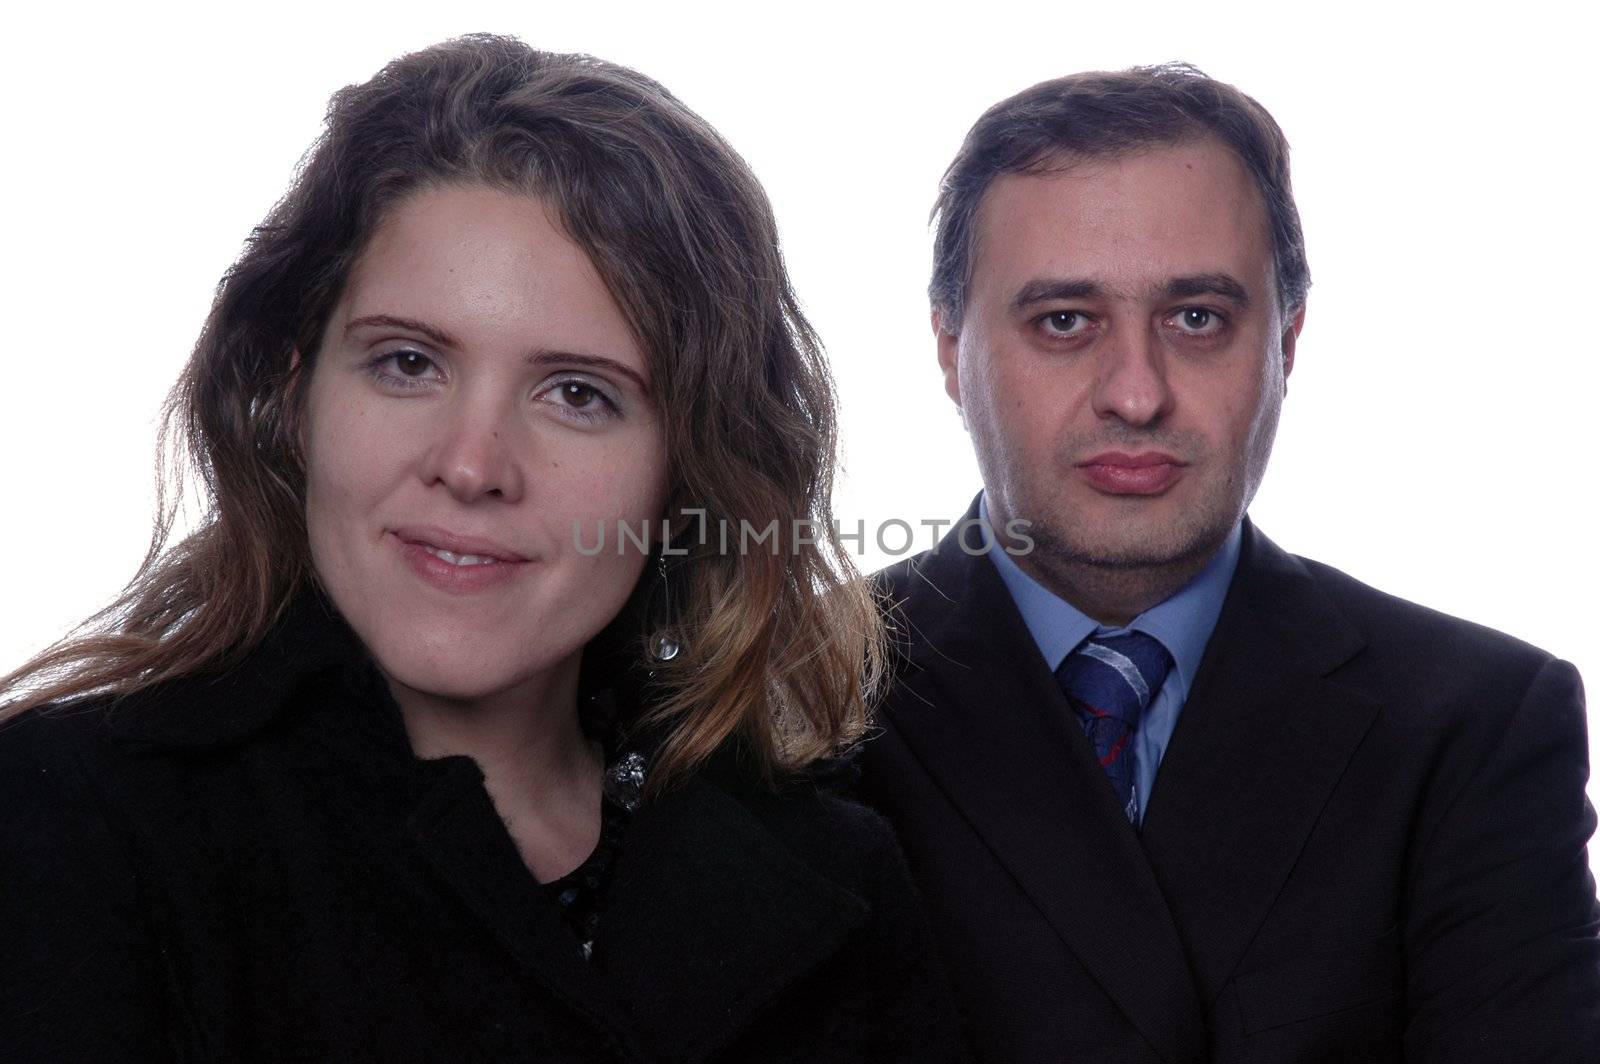 business partners smiling over a white background, focus in her eyes